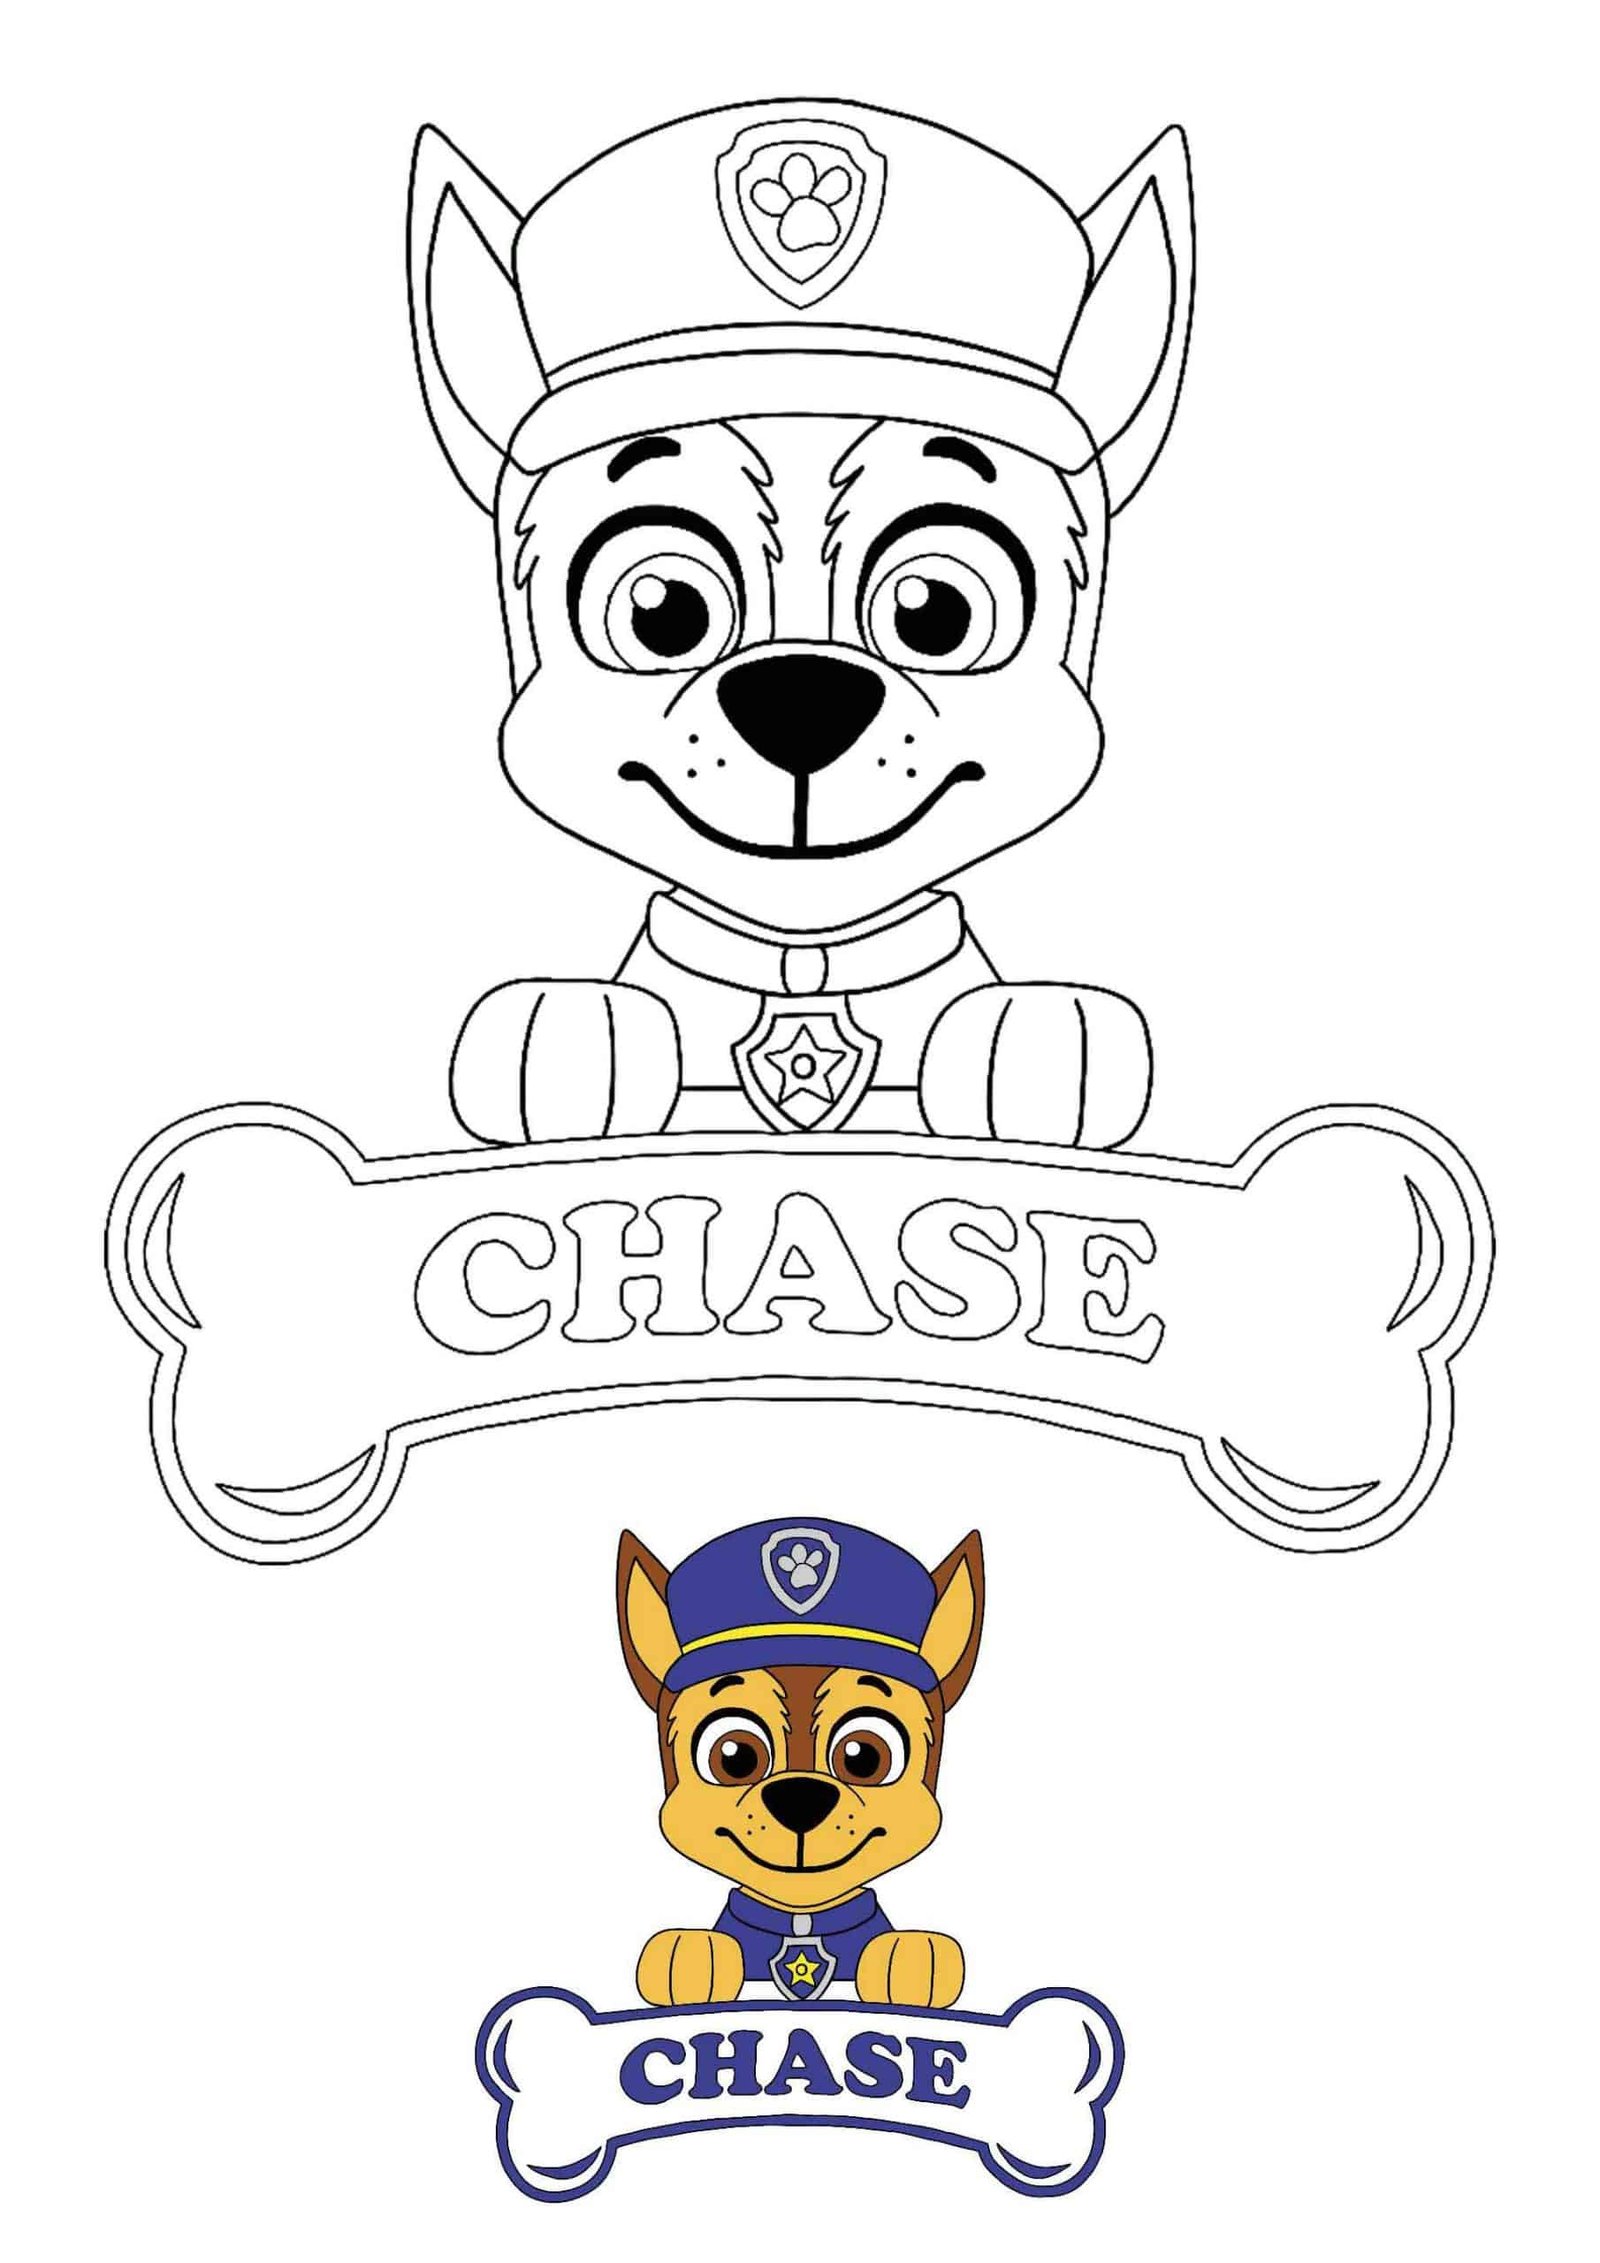 Paw Patrol Chase coloring page with sample